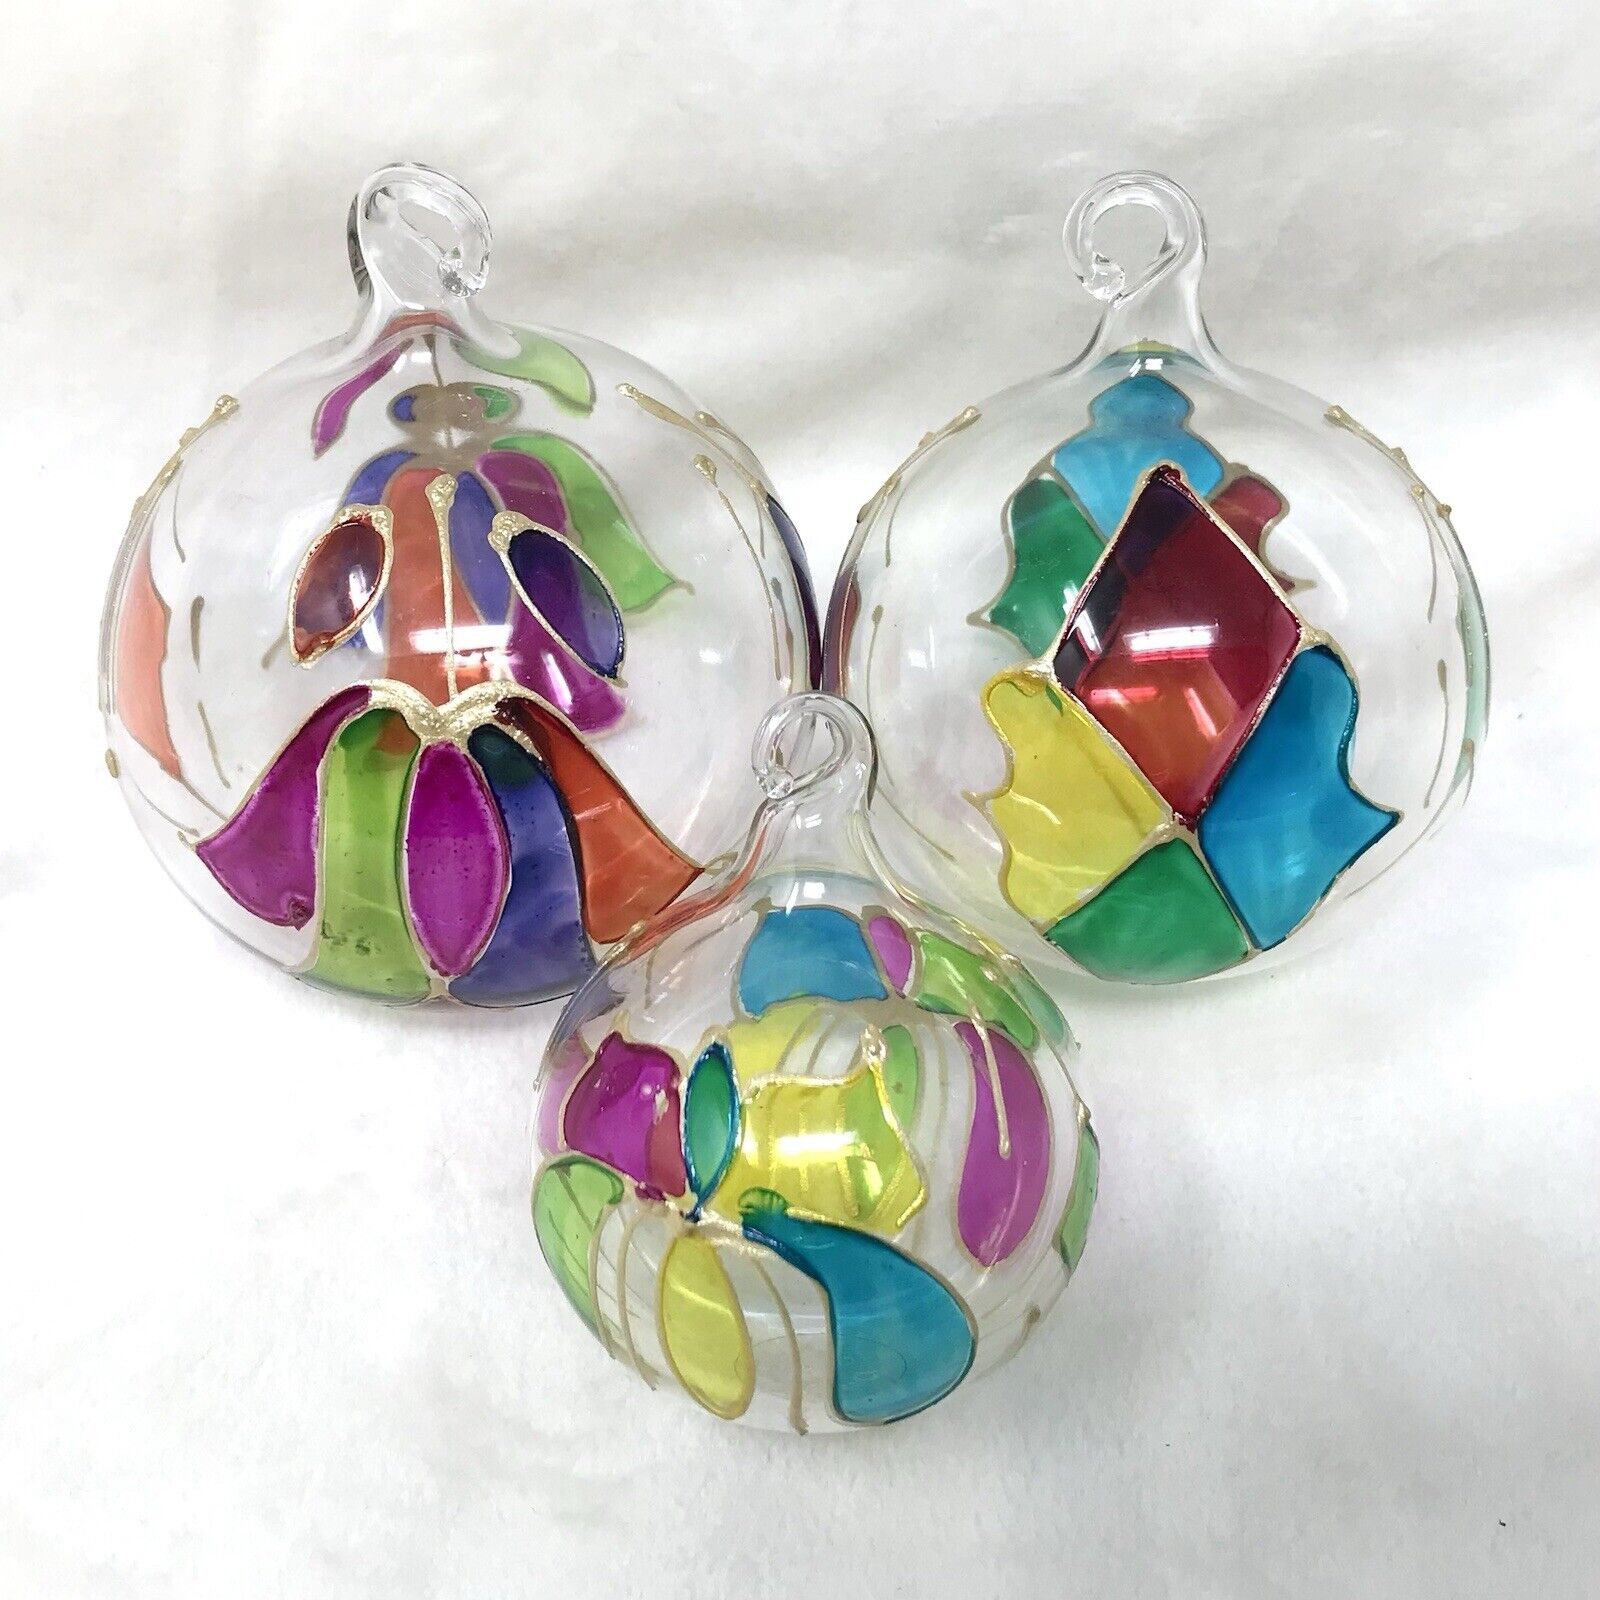 Vintage Parise Vetro Made In Italy Glass Blown Colorful Ornaments Round Set of 3